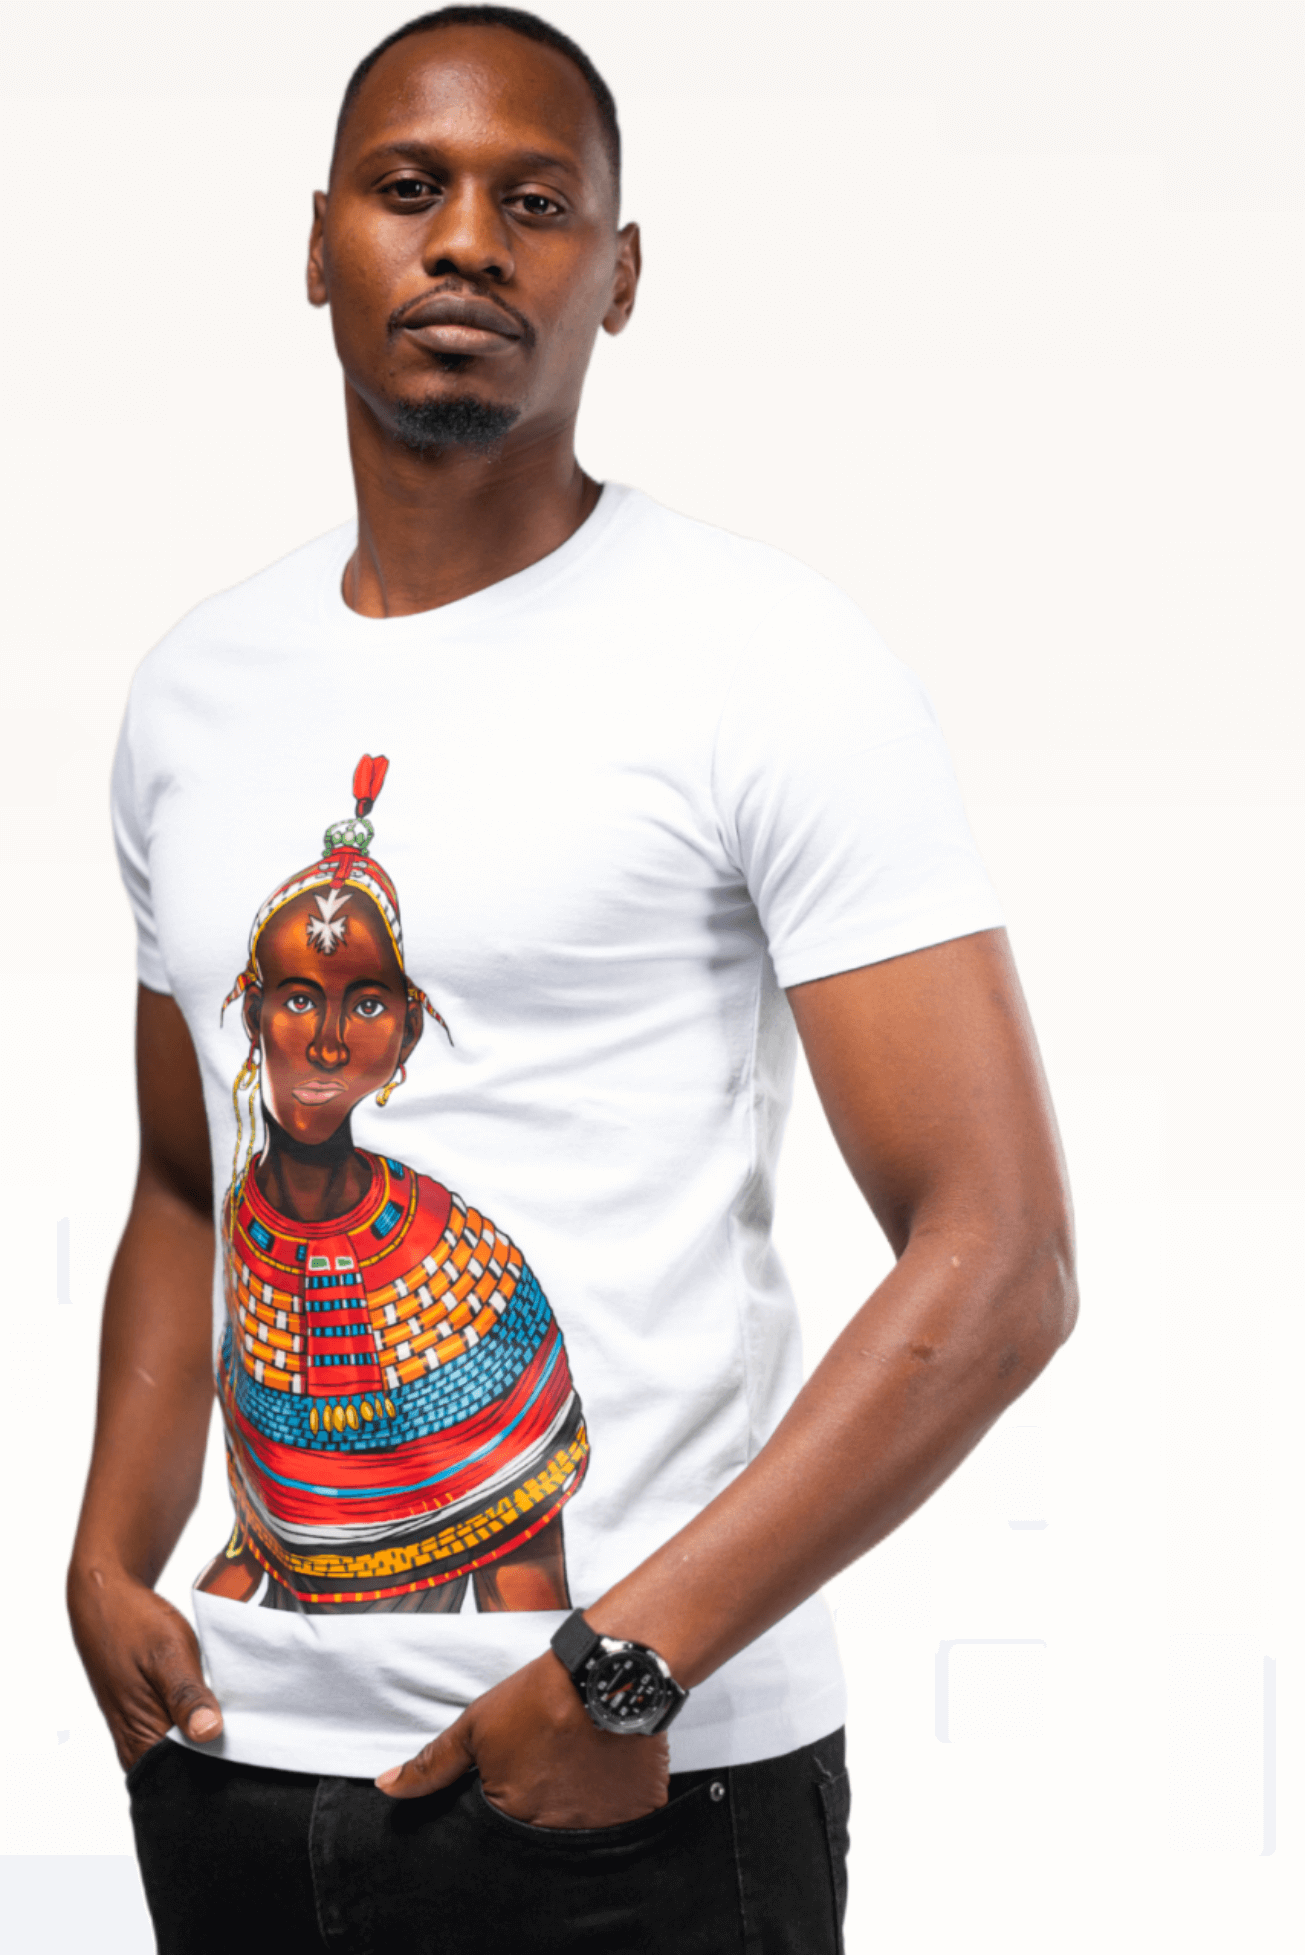 Shop MASSAI Print Tee by Kali Works on Arrai. Discover stylish, affordable clothing, jewelry, handbags and unique handmade pieces from top Kenyan & African fashion brands prioritising sustainability and quality craftsmanship.